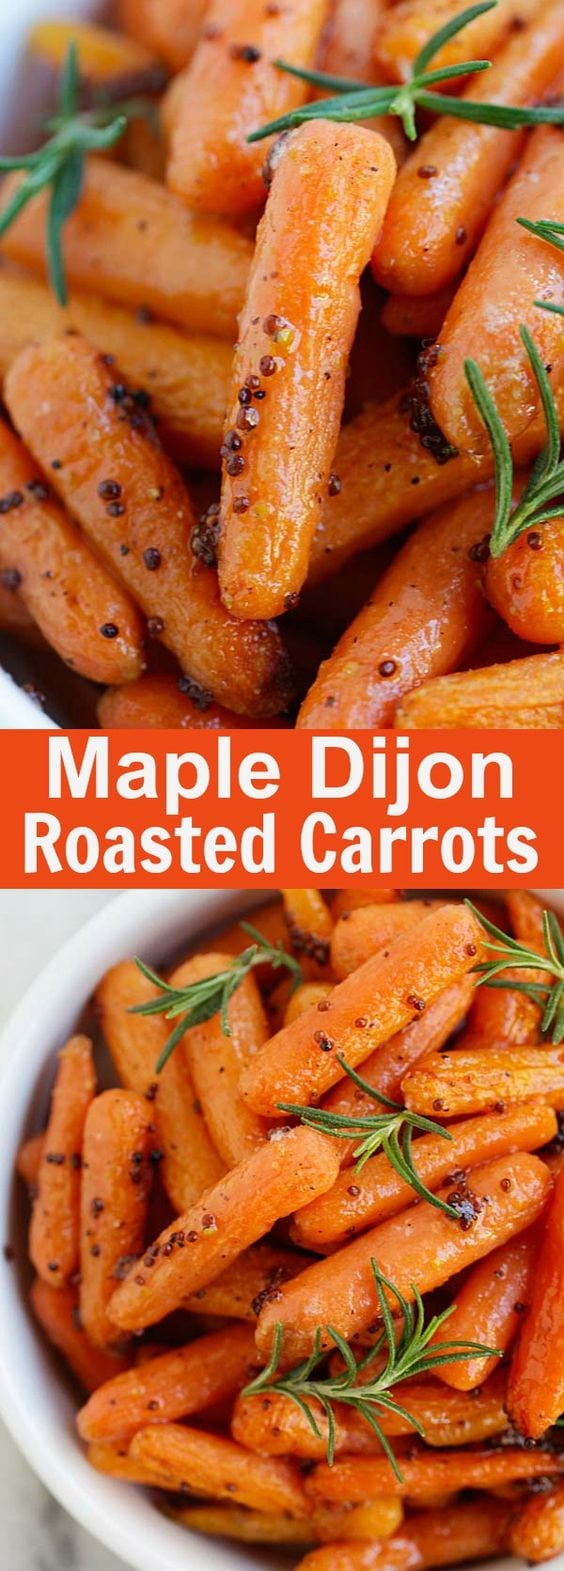 Maple Dijon Roasted Carrots – yummy roasted carrots recipe with maple syrup and dijon mustard. Easy peasy and takes only 10 mins active time | rasamalaysia.com